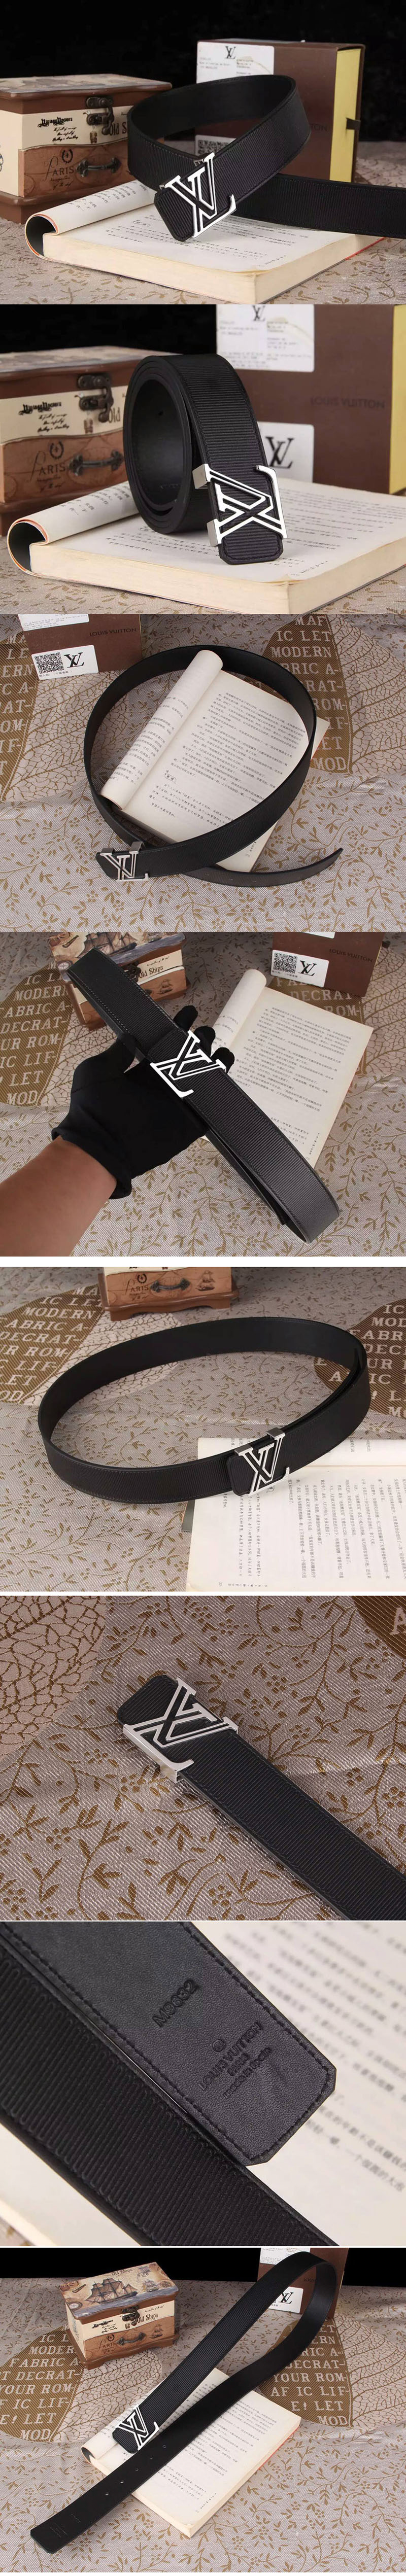 Replica Louis Vuitton Epi Leather Belts With Black/Silver Buckle